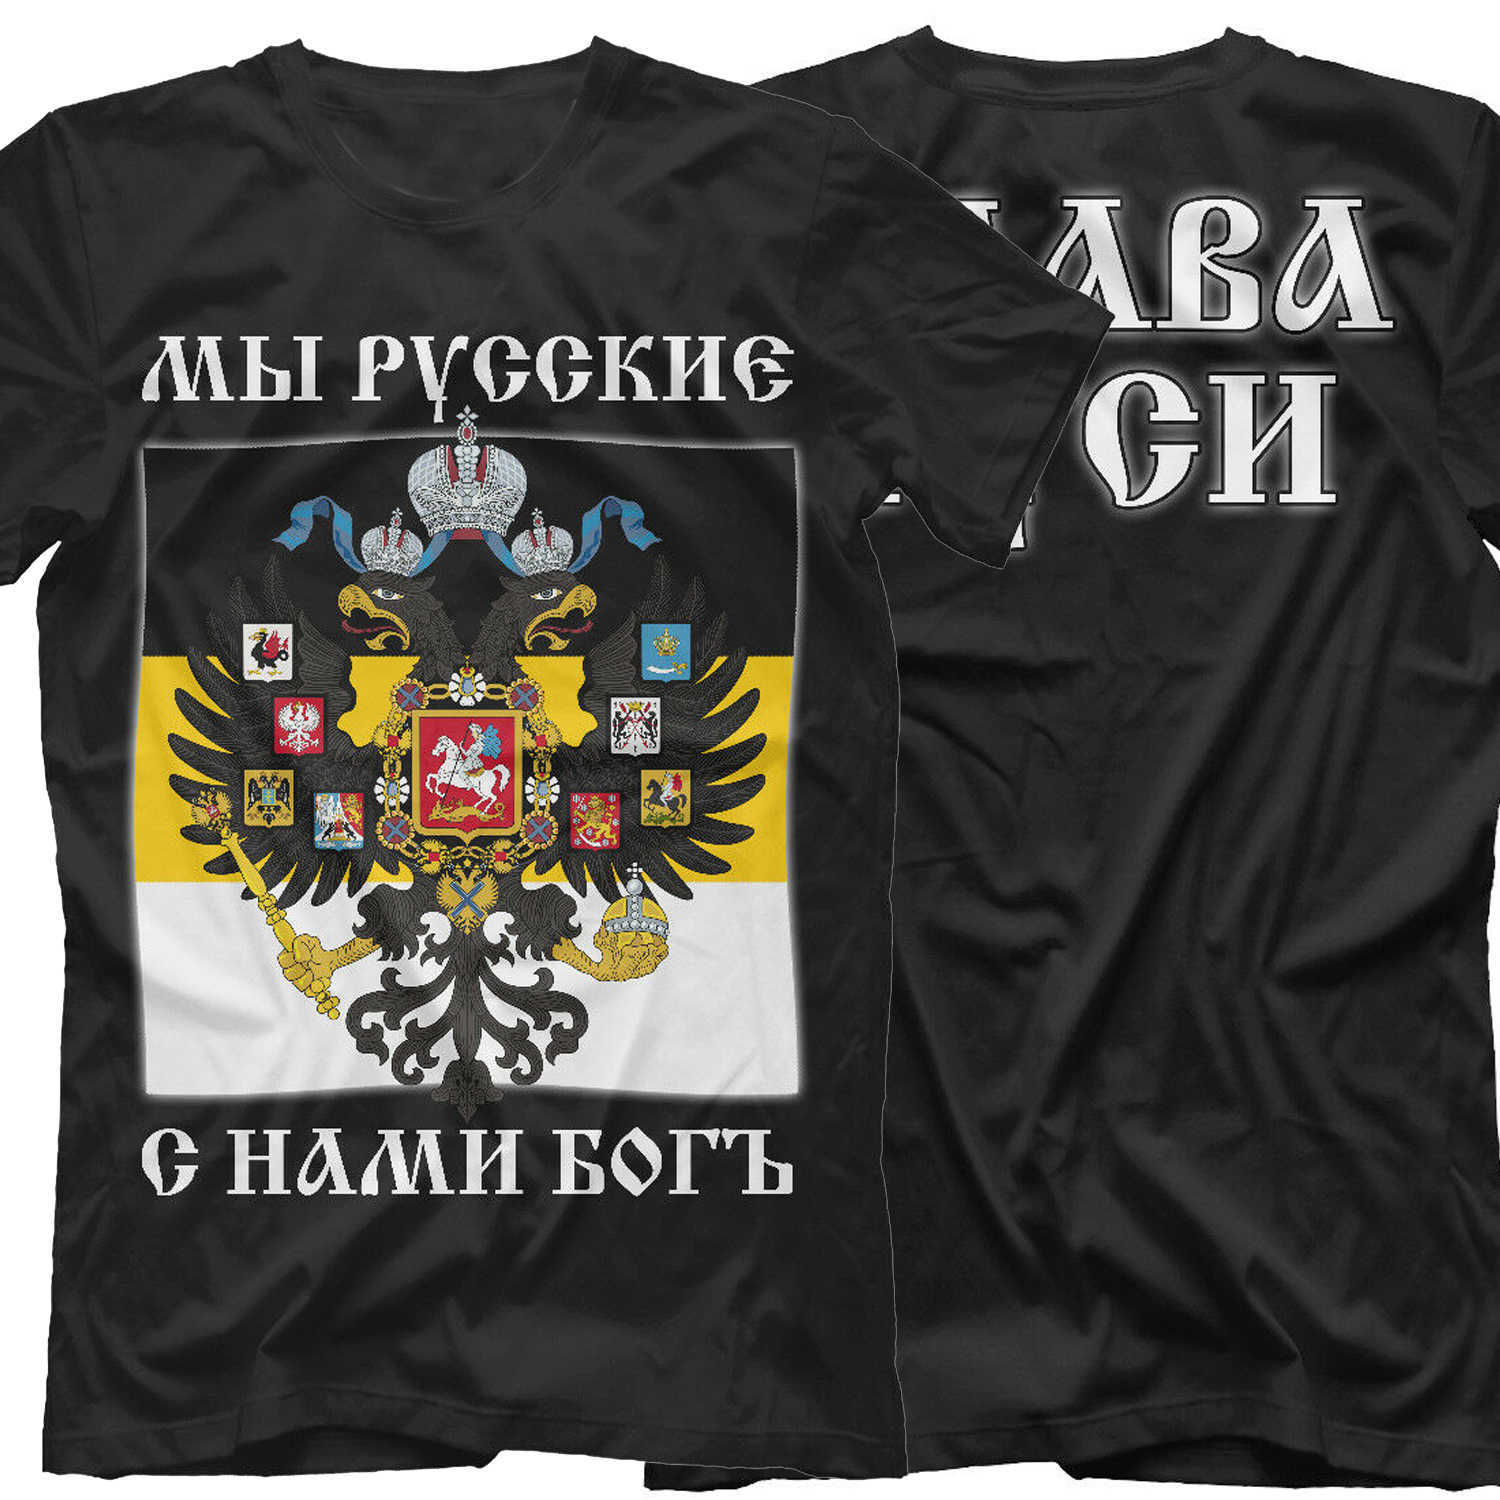 

Men's T-Shirts We Are Russian God Is with Us. Fashion Russian Empire Eagle Flag Slavs T-Shirt. Summer Cotton Short Sleeve O-Neck Mens T Shirt L230217, Black